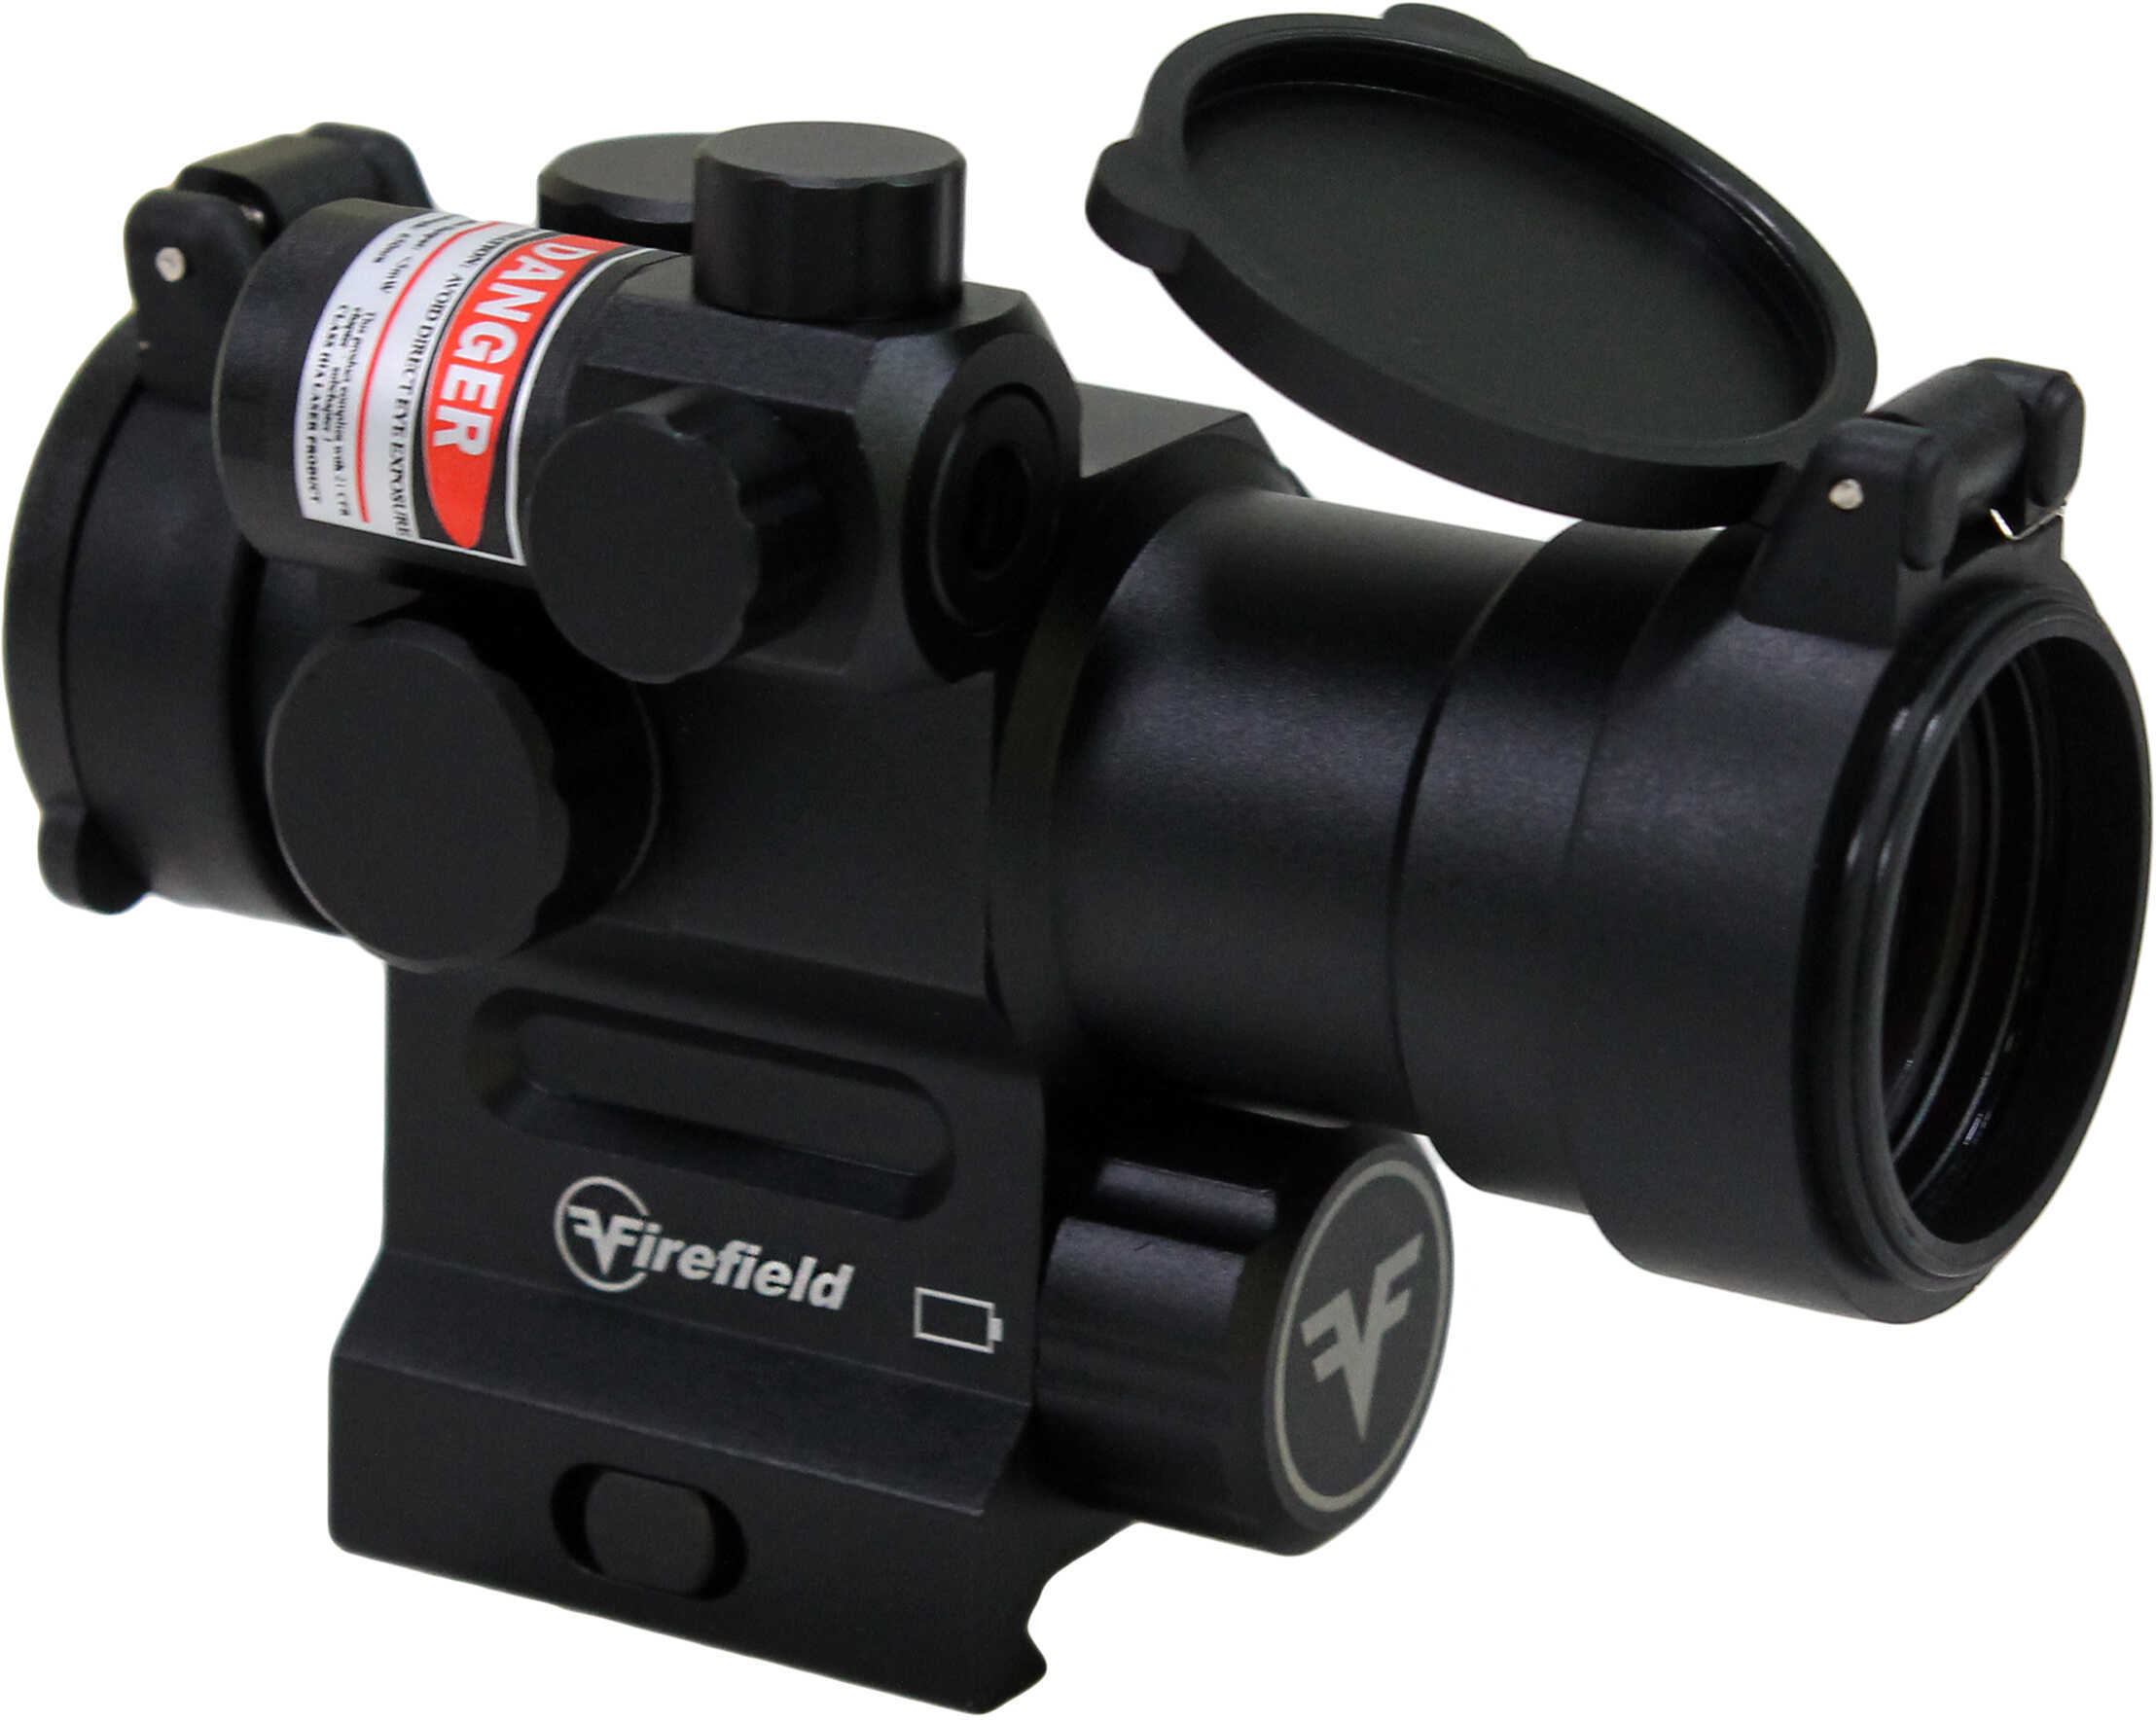 Firefield Impulse 1x30mm Red Dot Sight with Red Laser Md: FF26020